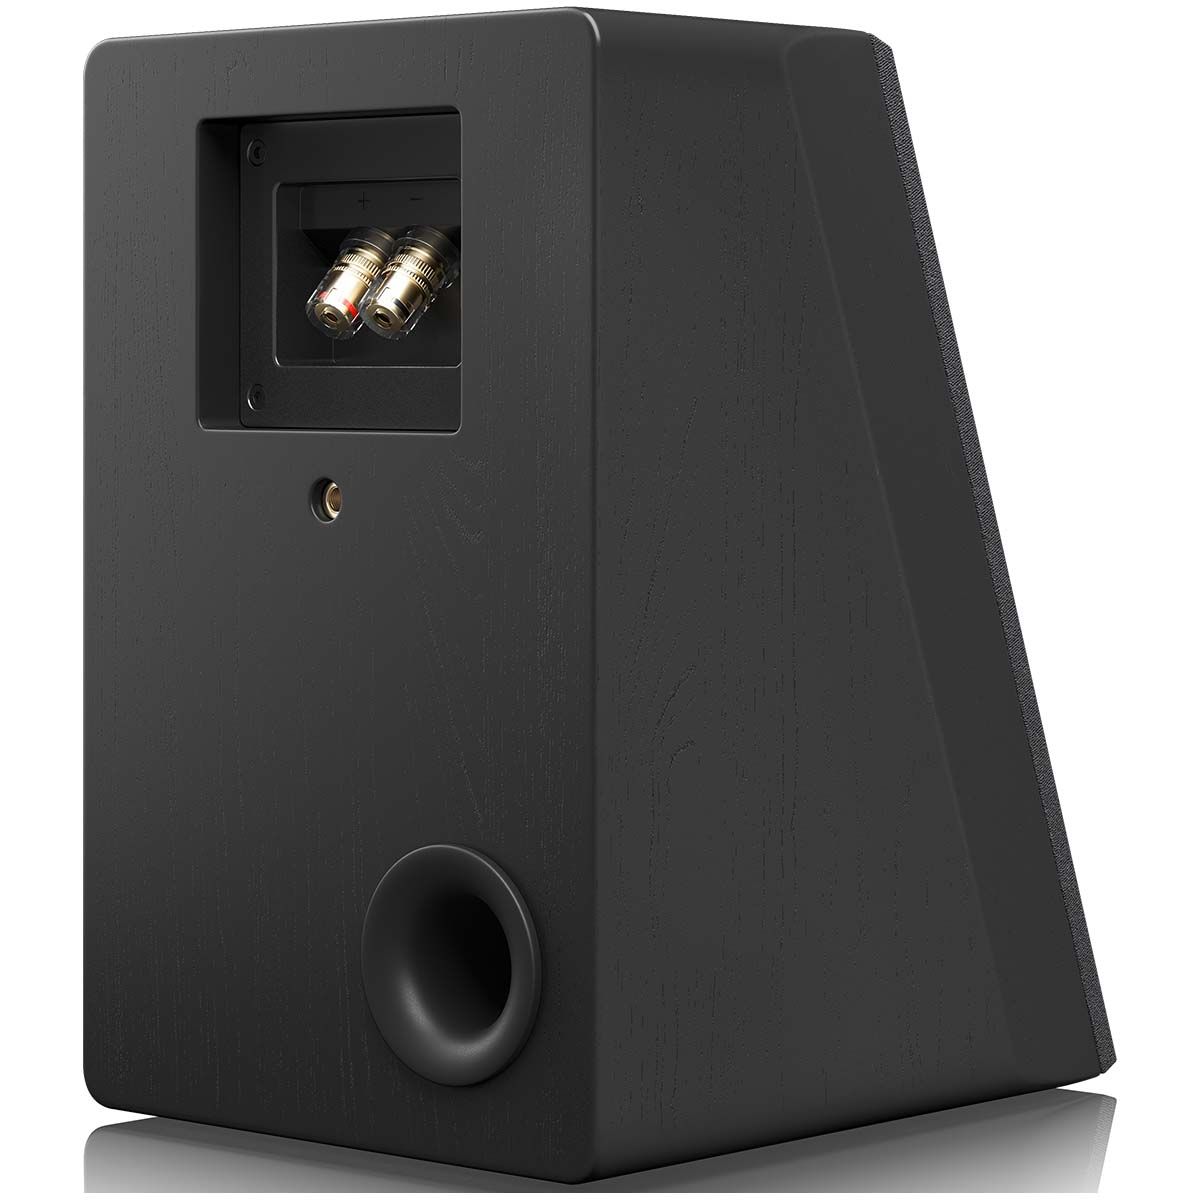 SVS Ultra Elevation Surround Speaker - single black oak with grille - angled rear view